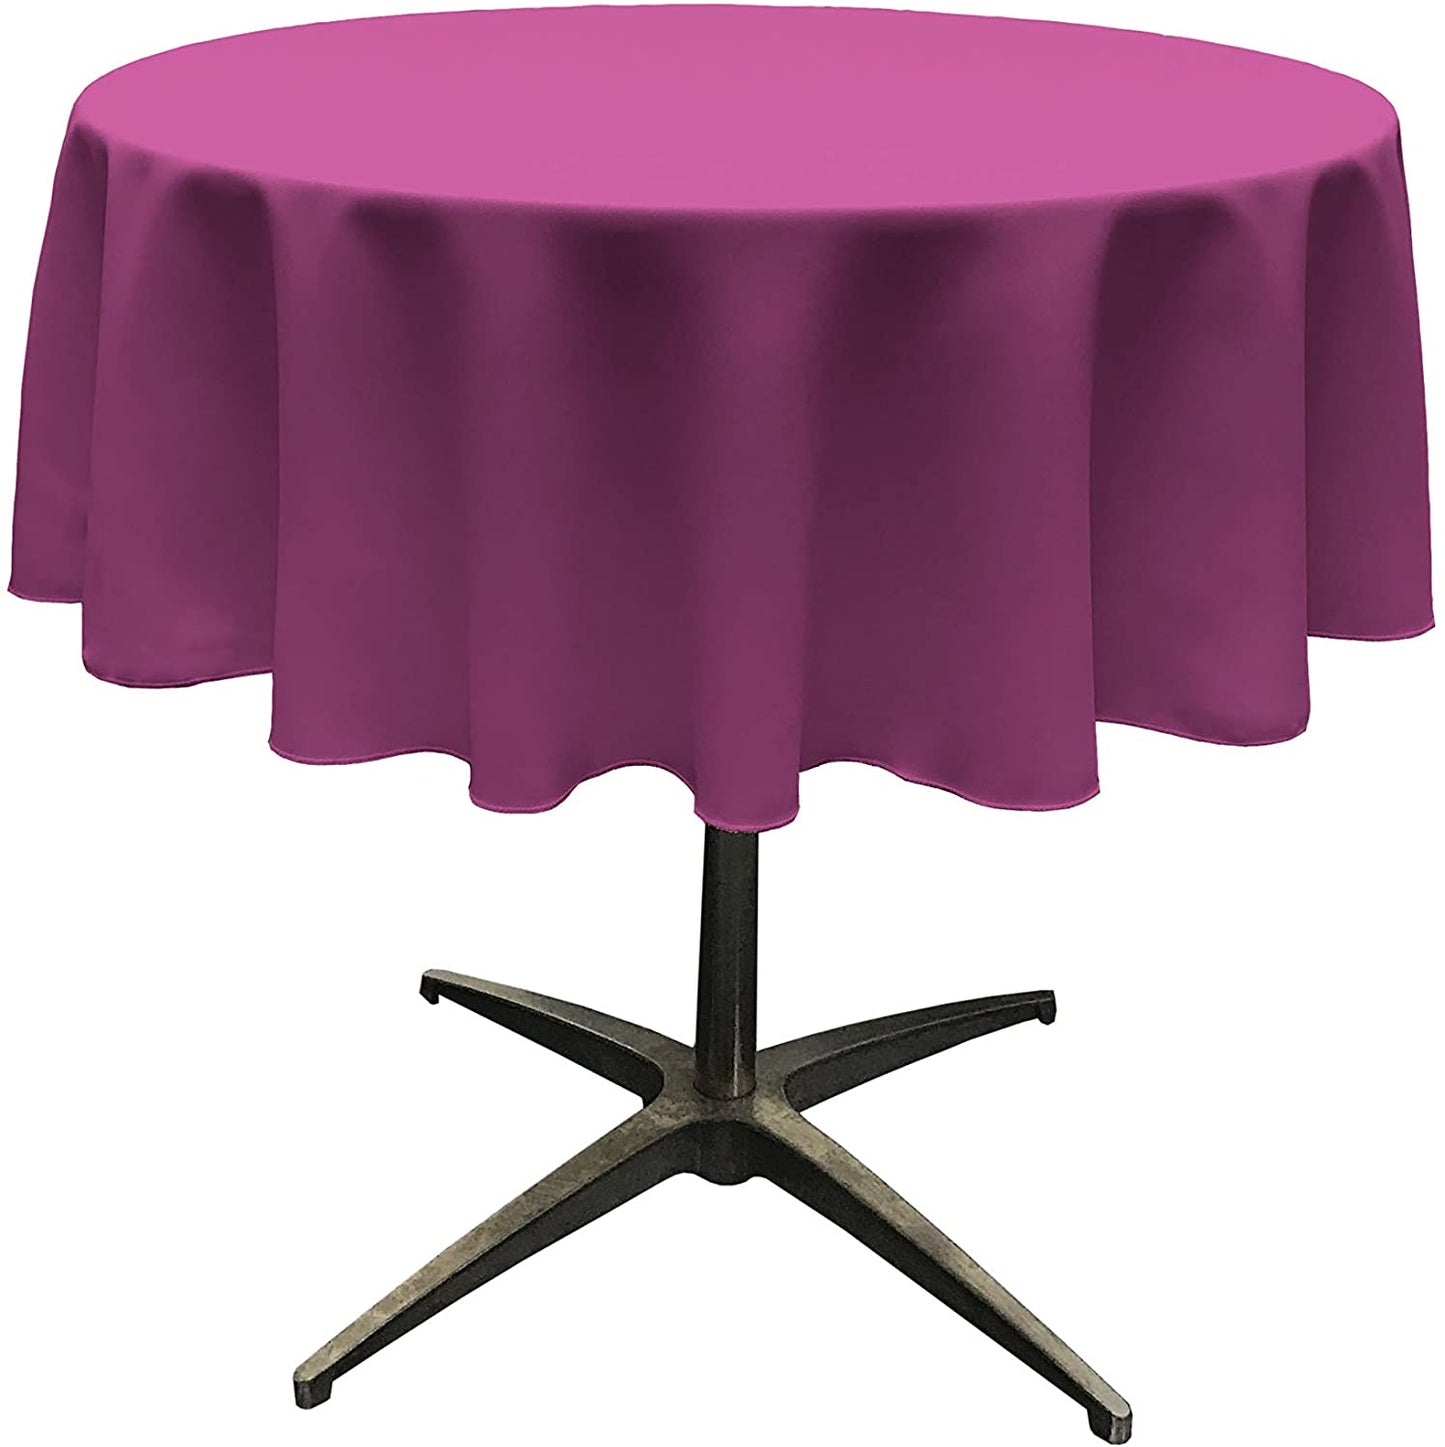 Polyester Poplin Washable Round Tablecloth, Stain and Wrinkle Resistant Table Cover Magenta